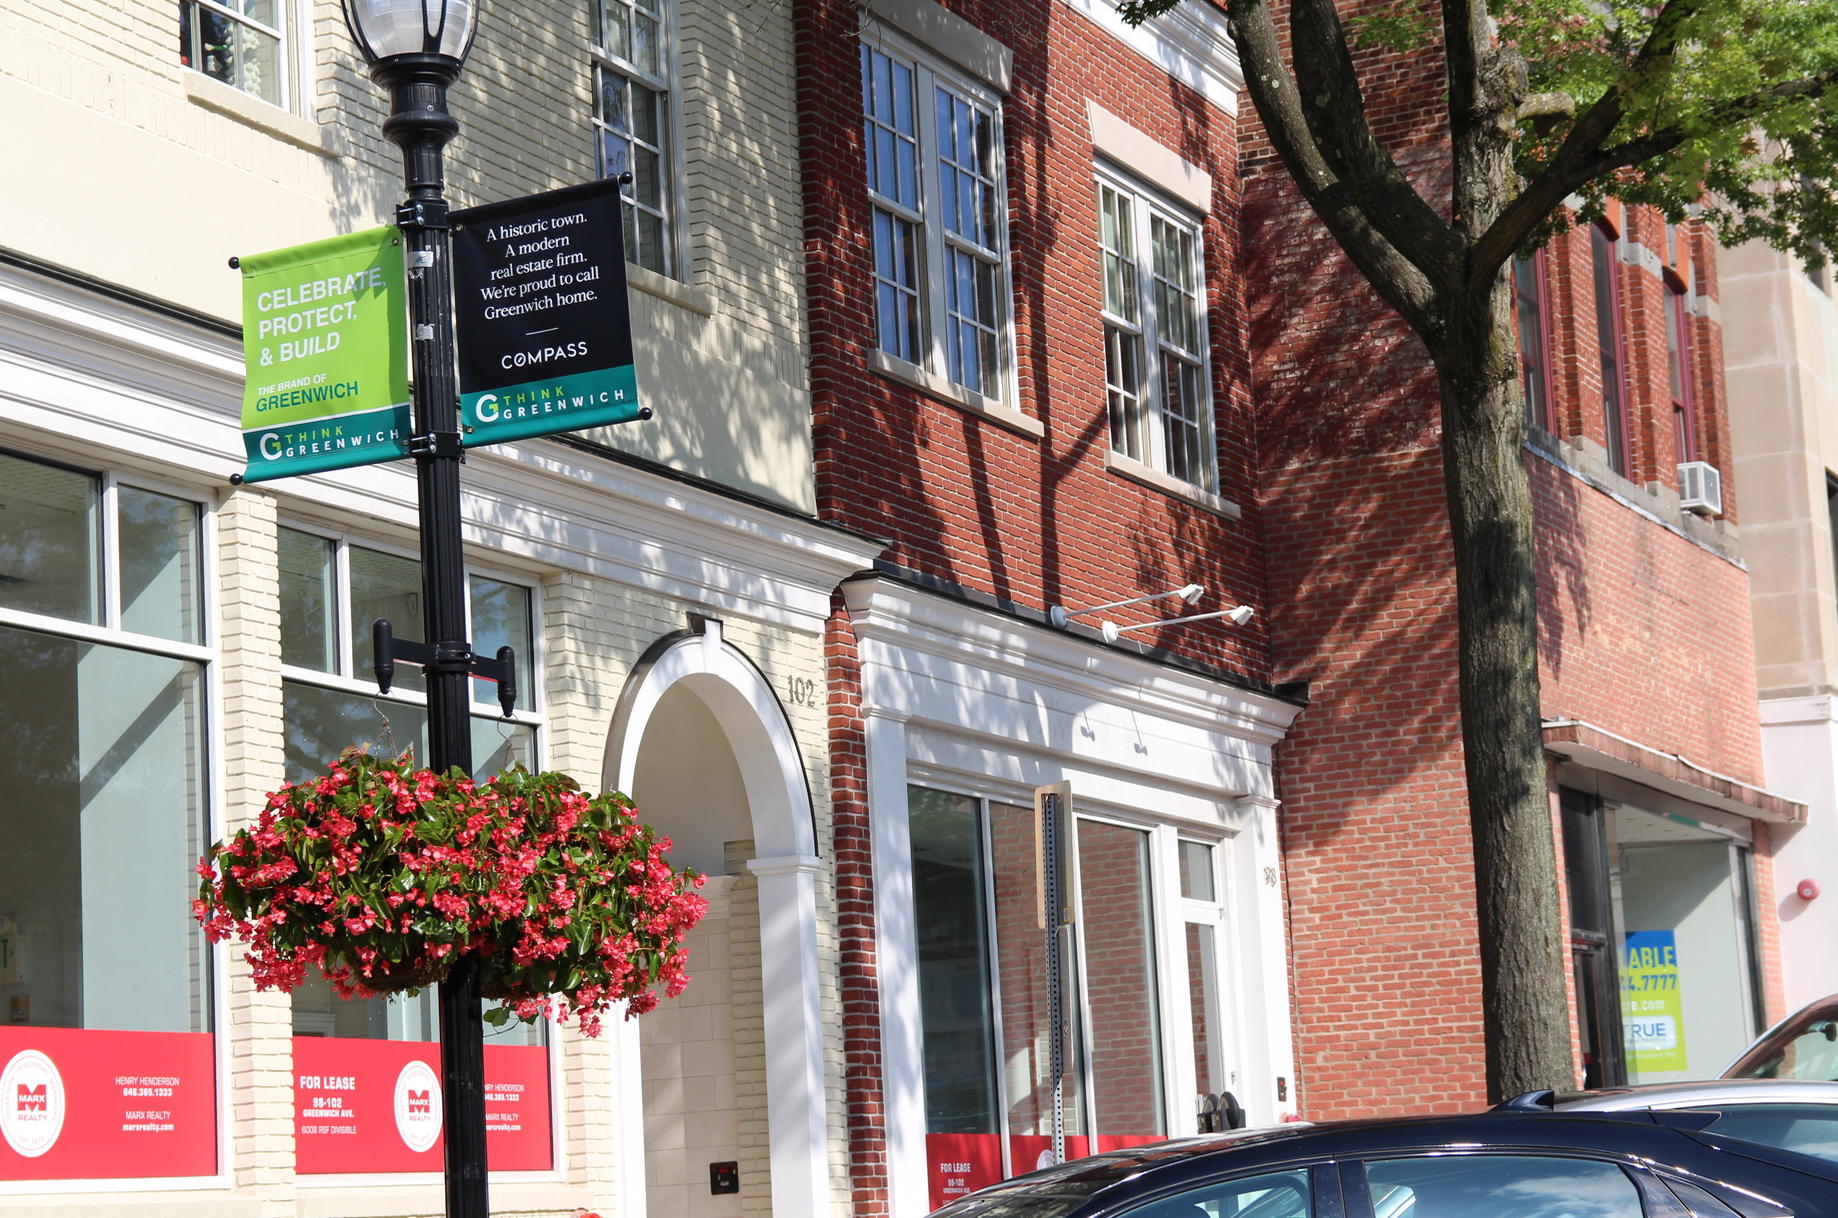 ThinkGreenwich banners hang from lamp posts on Greenwich Avenue. Aug 15, 2019 Photo: Leslie Yager